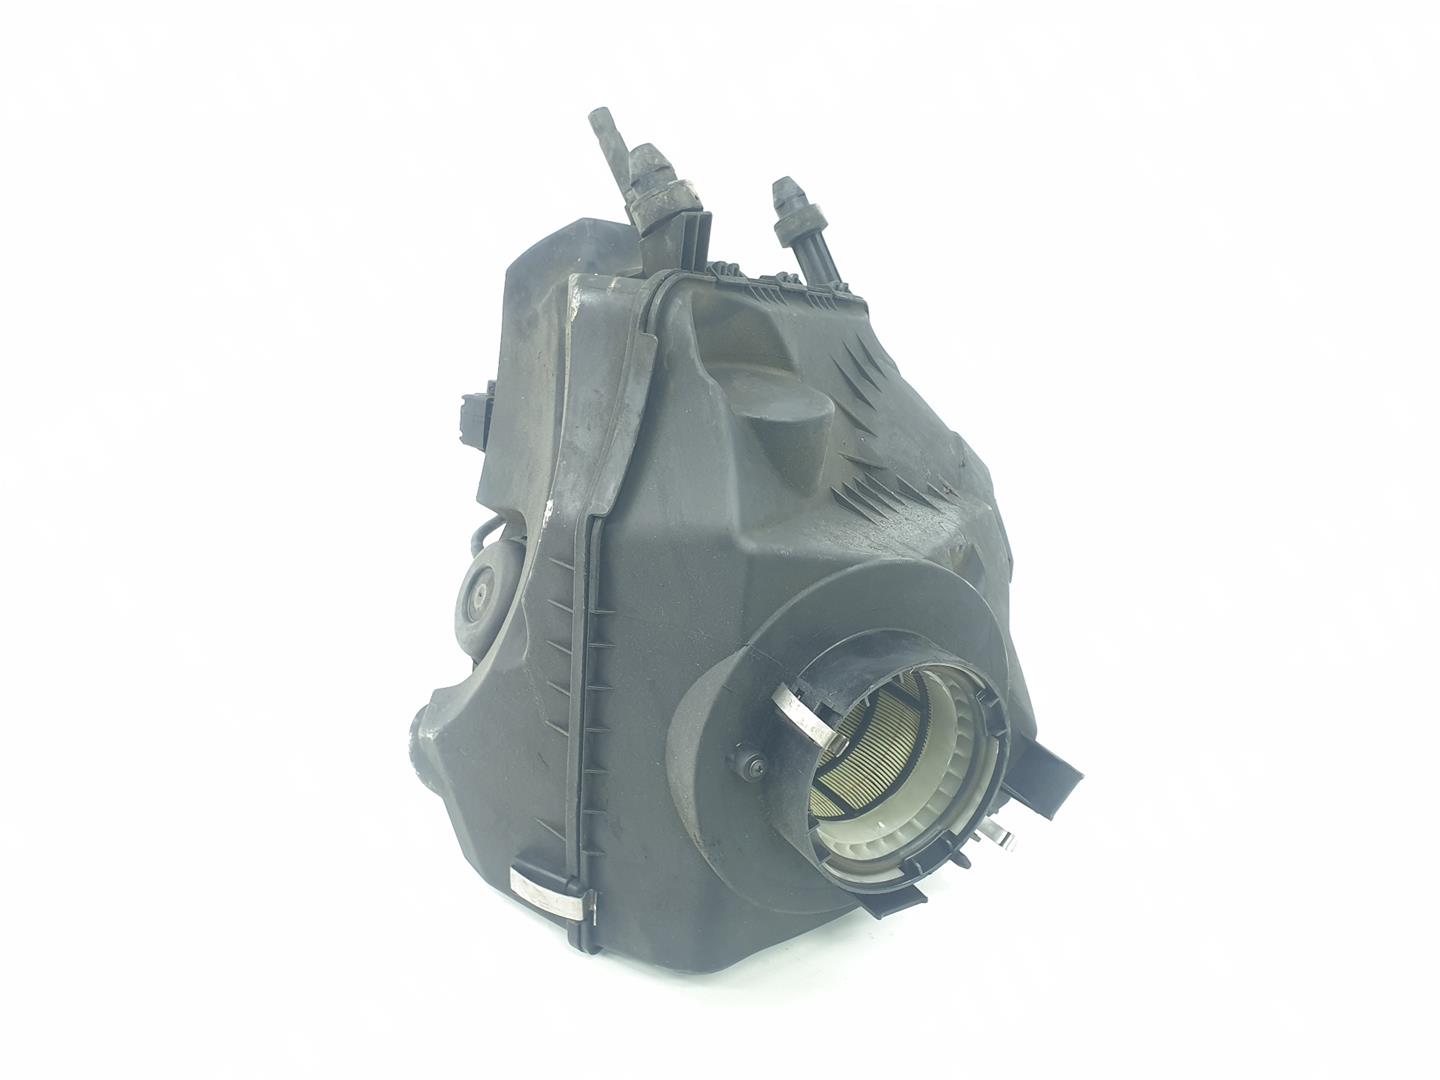 AUDI A6 C6/4F (2004-2011) Other Engine Compartment Parts 059133835E, 4F0133837BB 24247265